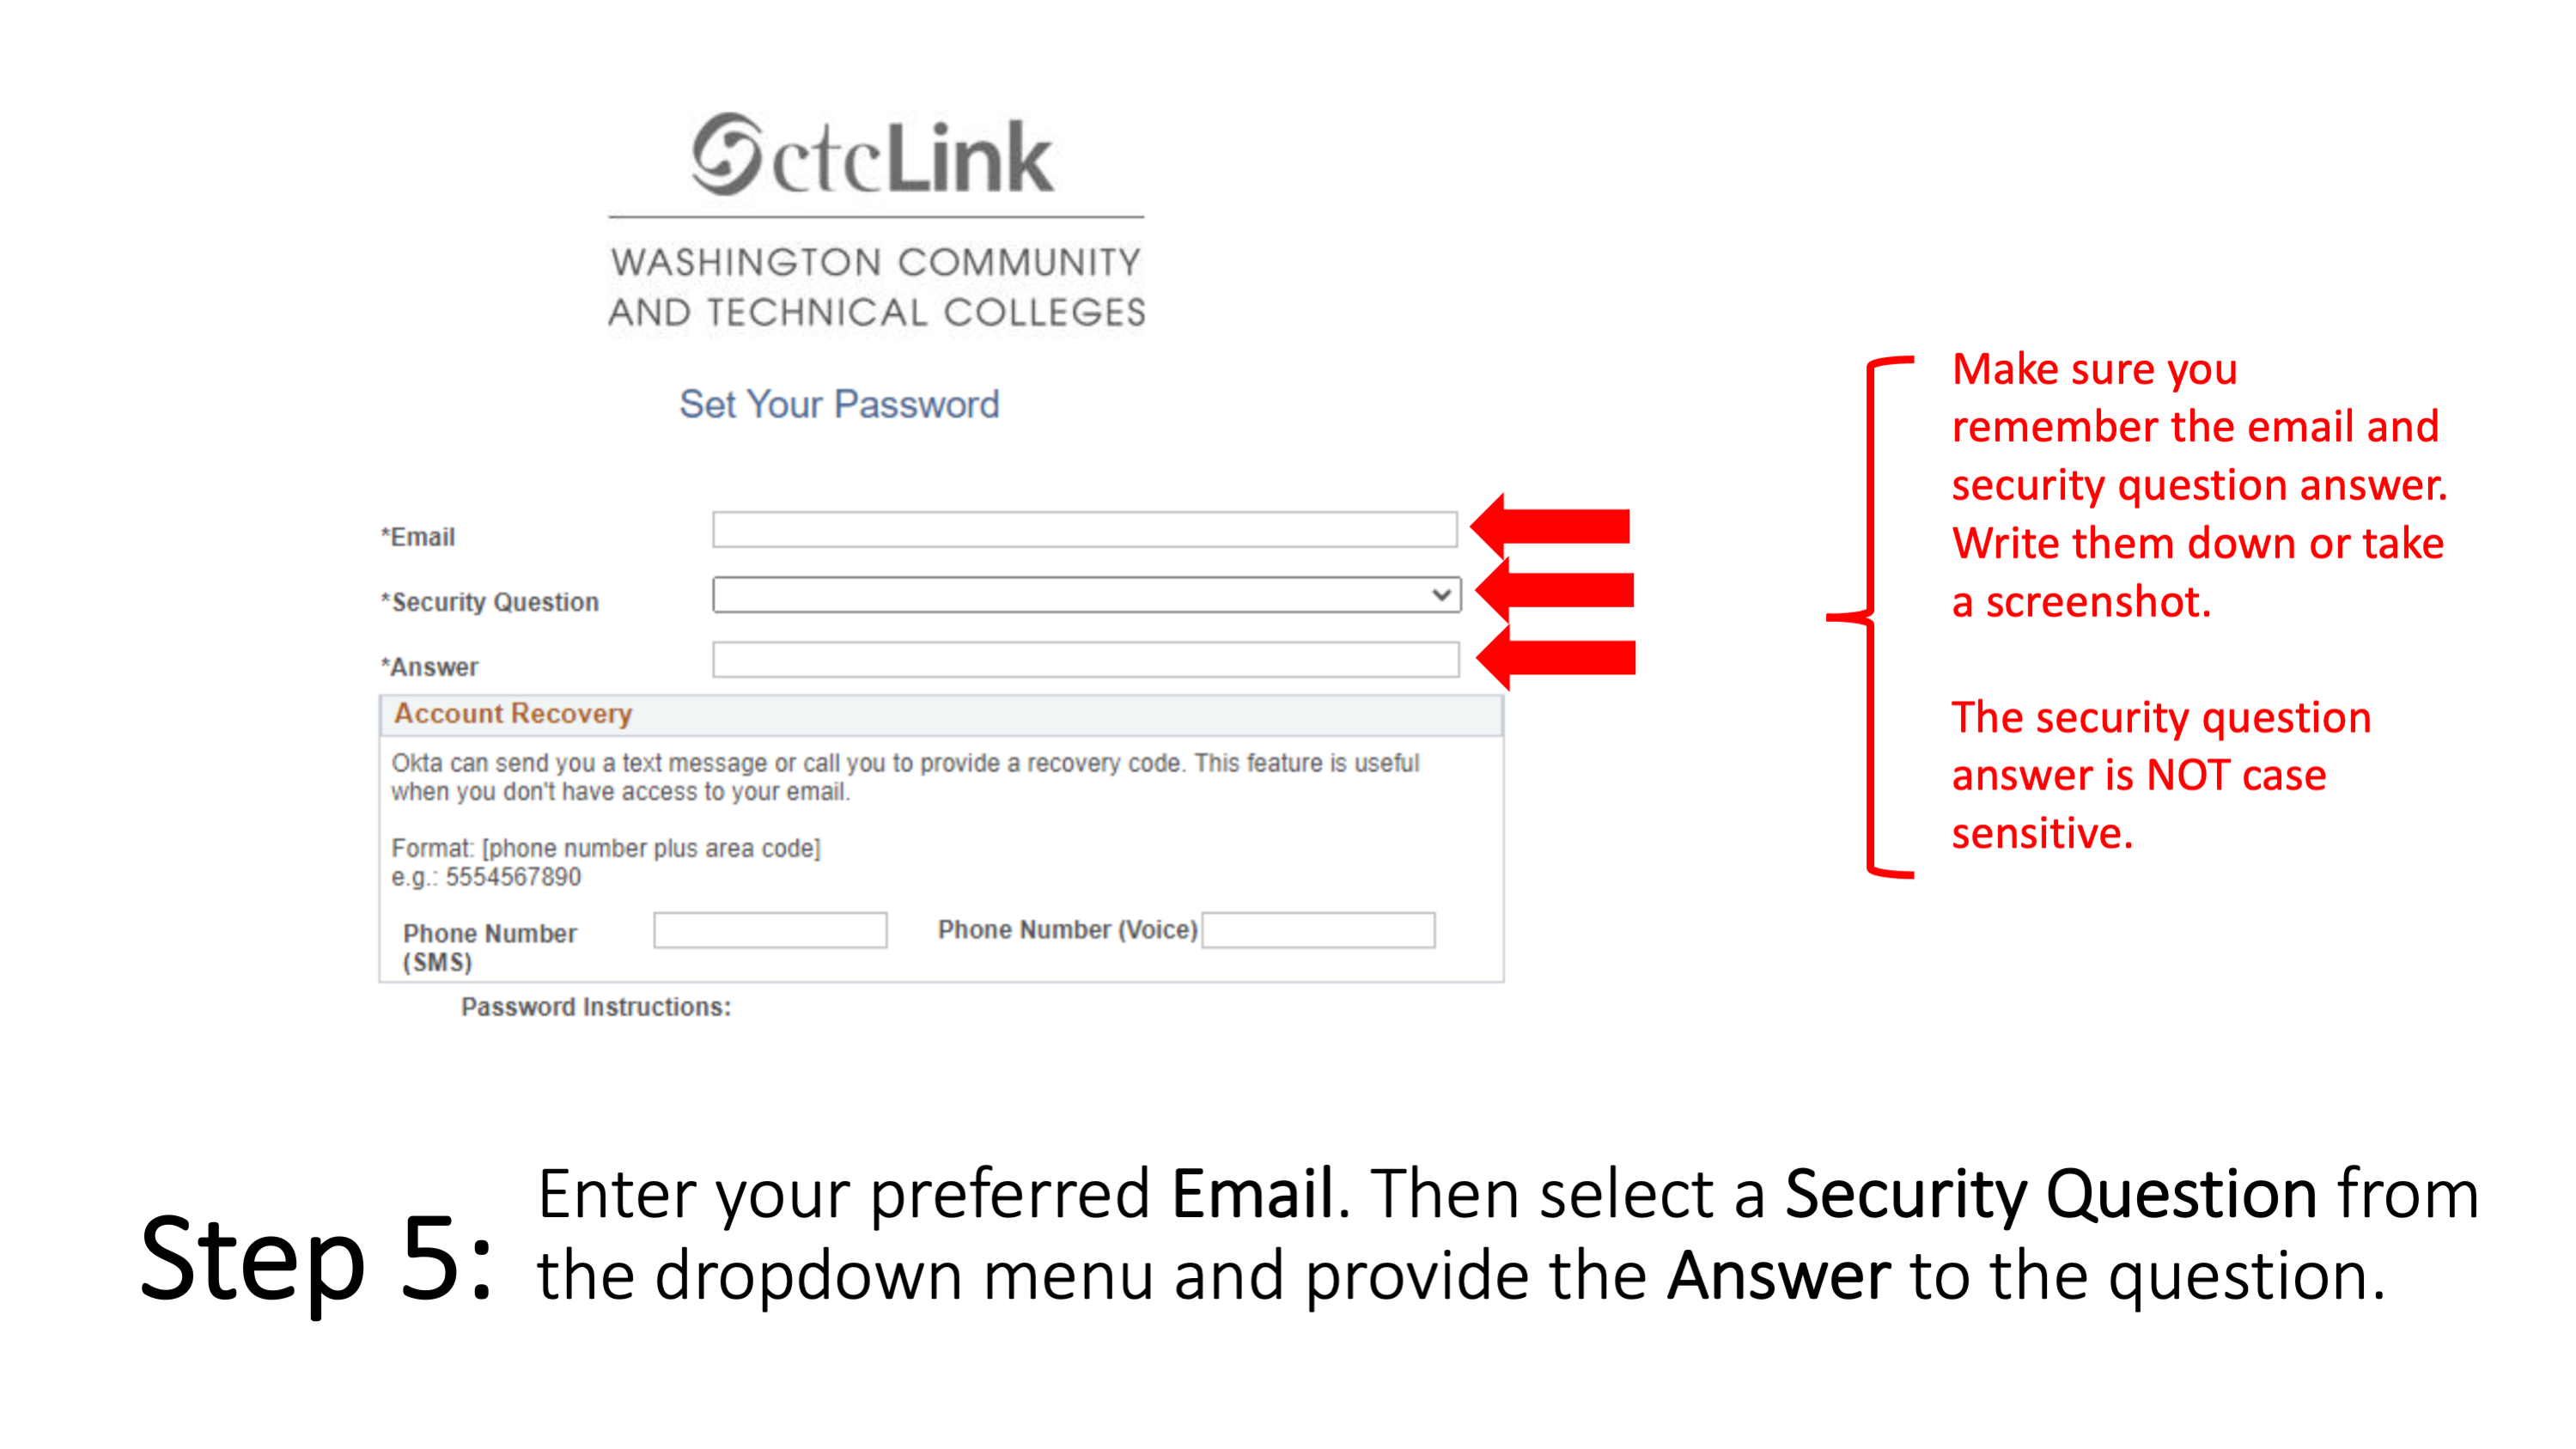 Step 5: Enter your preferred Email. Then select a Security Question from the dropdown menu and provide the Answer to the question. Make sure you remember the email and security question answer. Write them down or take a screenshot. The security question answer is NOT case sensitive. 